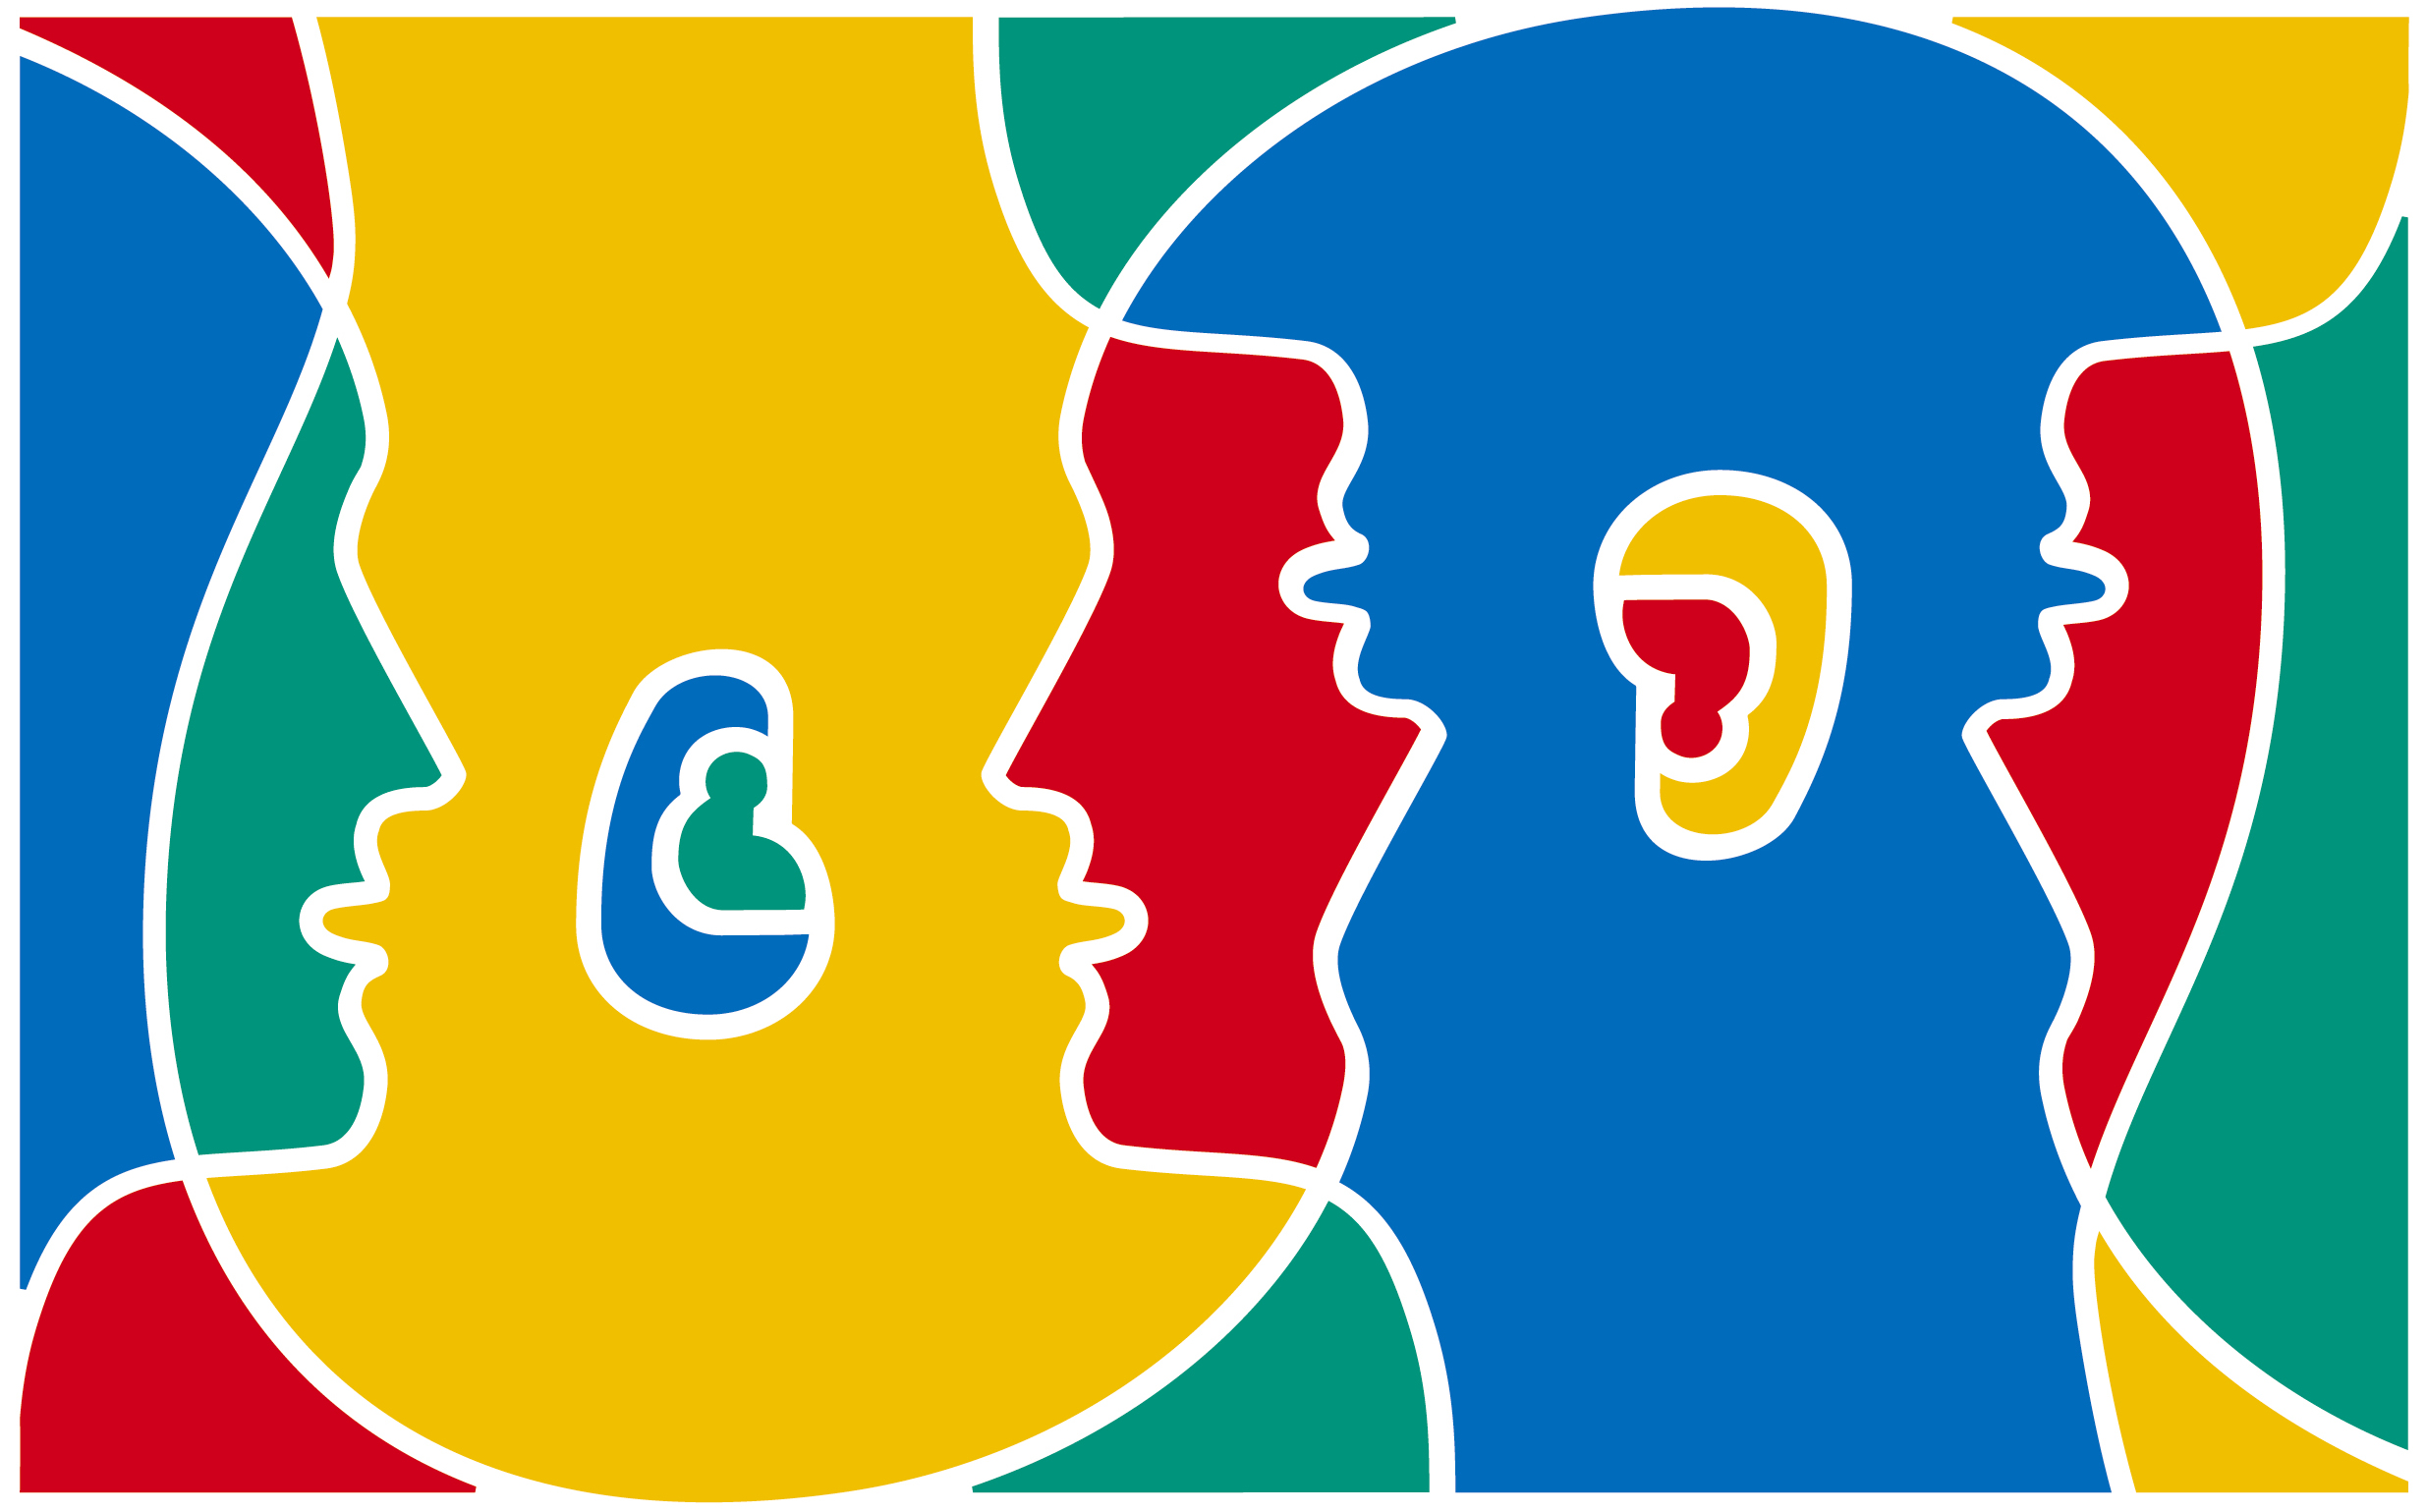 Official graphic for European Day of Languages